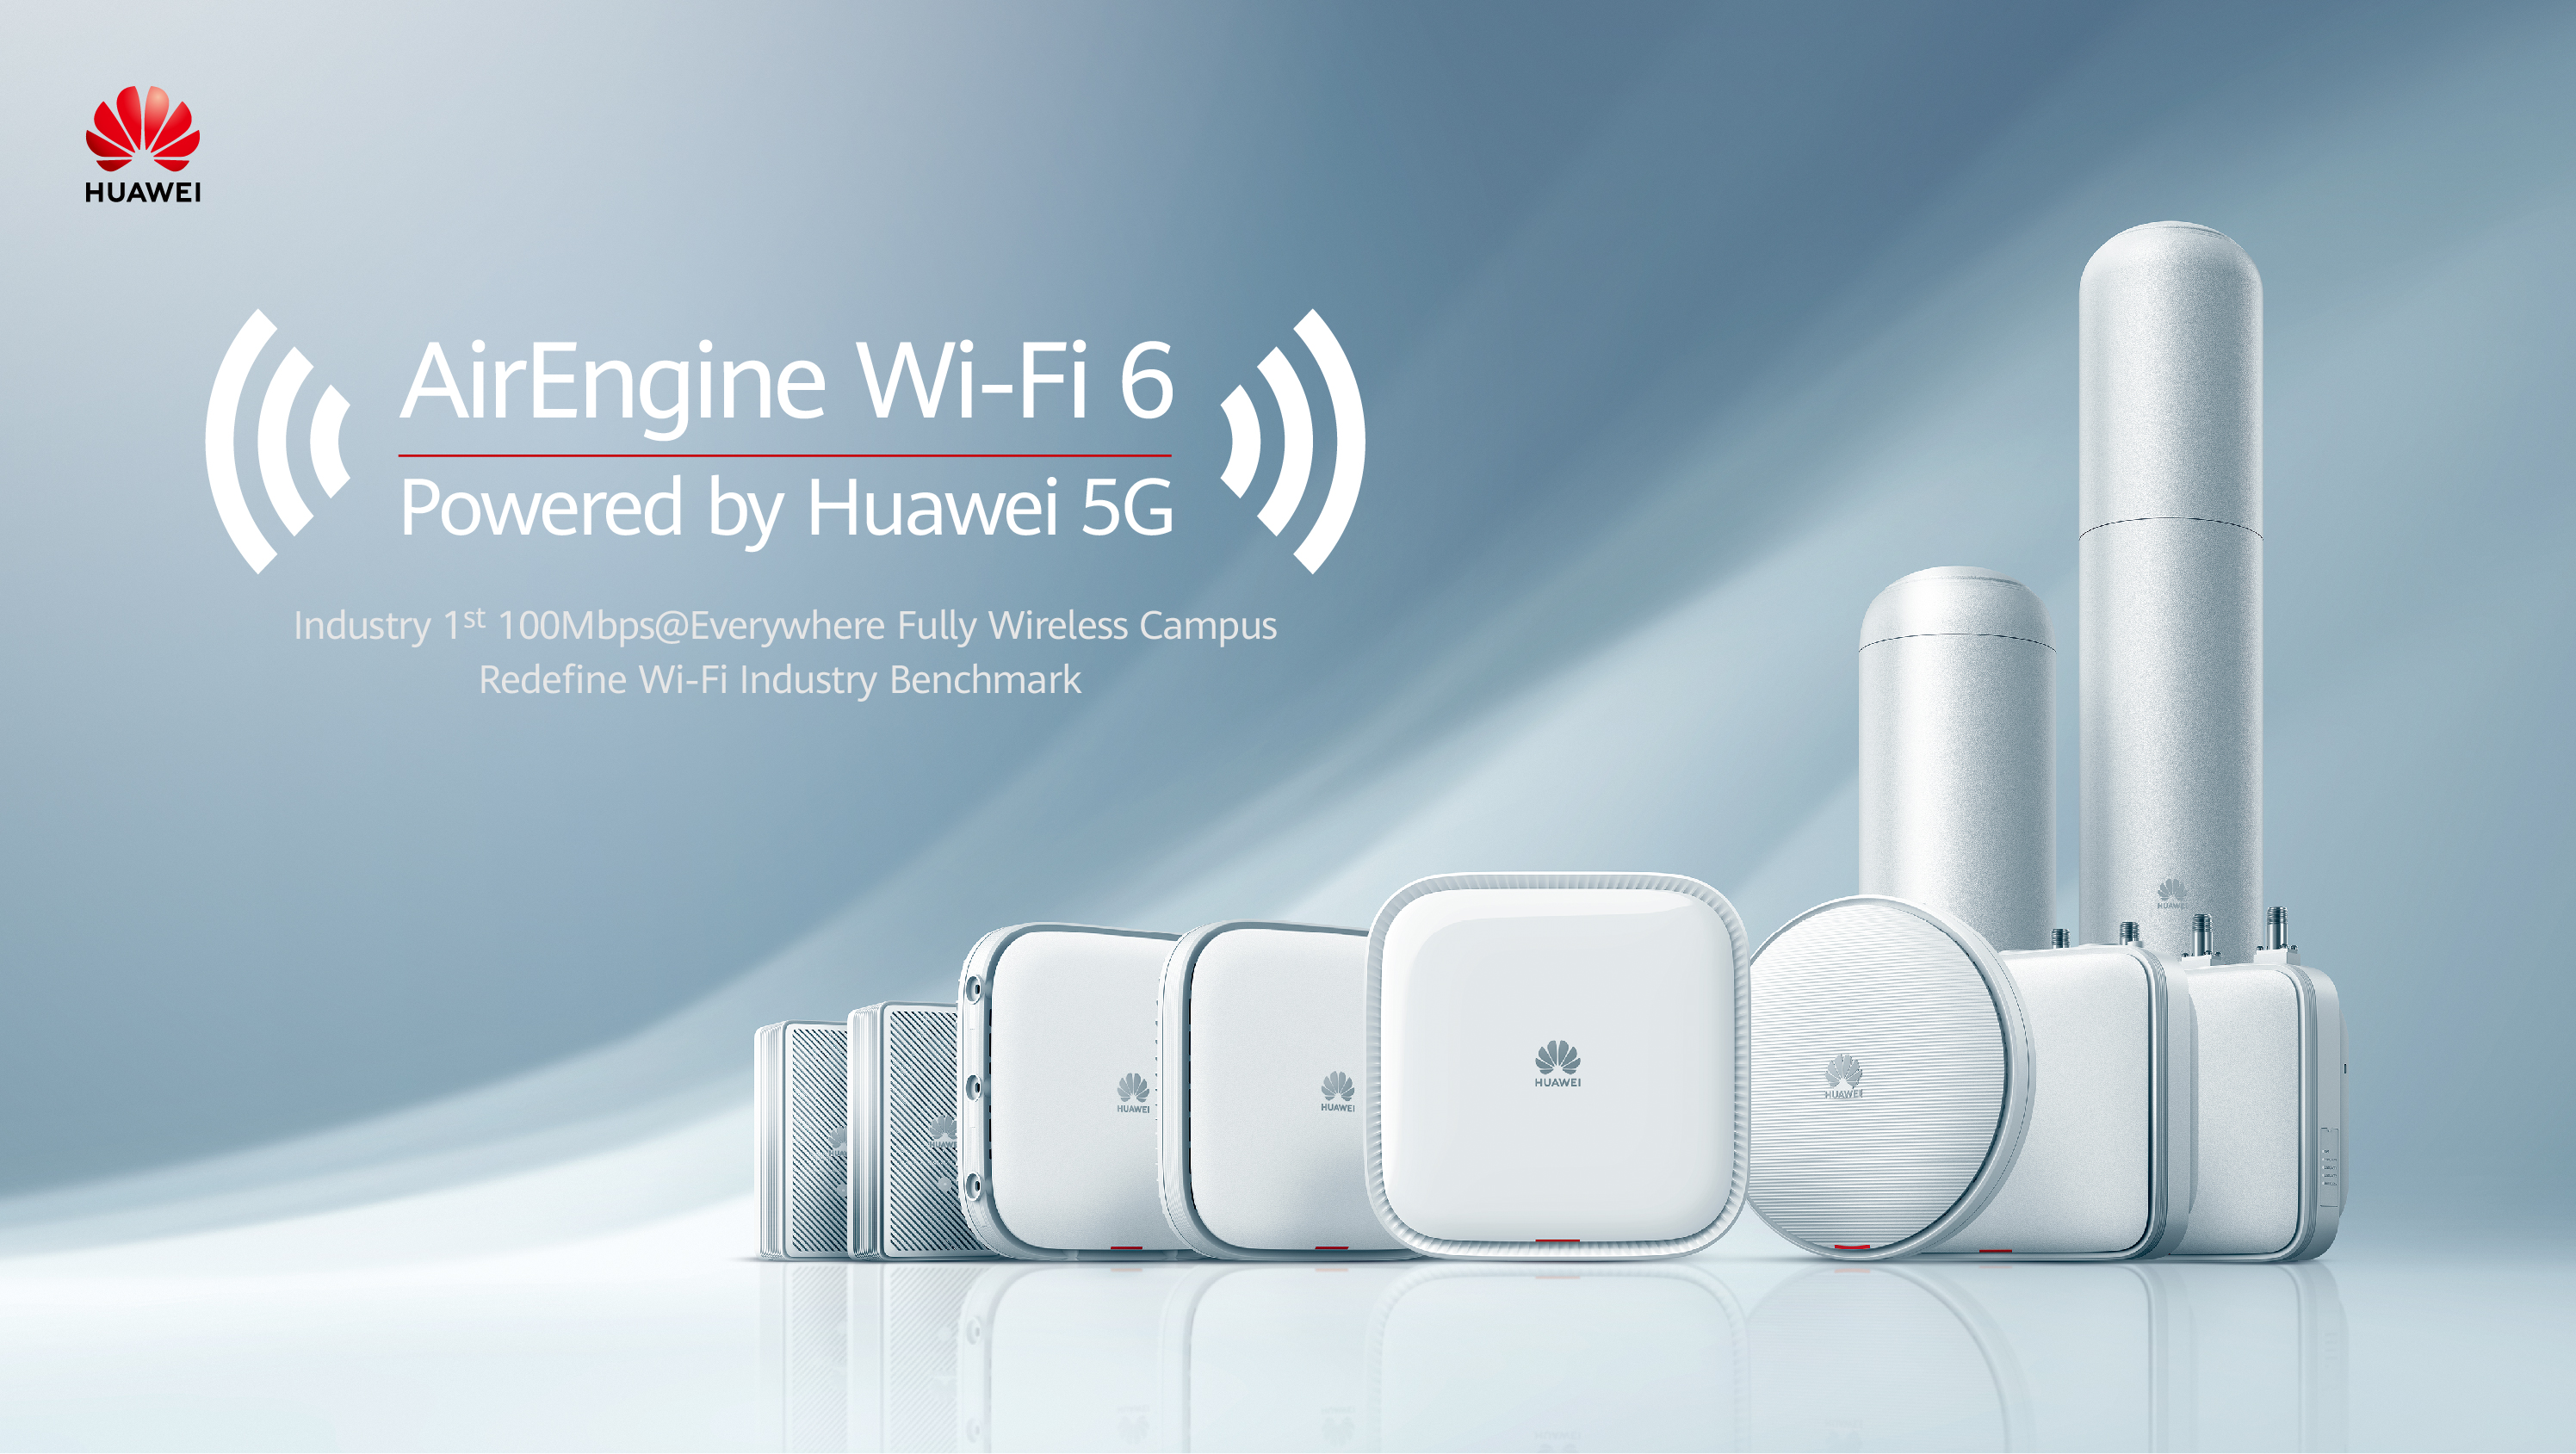 AirEngine Wi-Fi 6 Launch